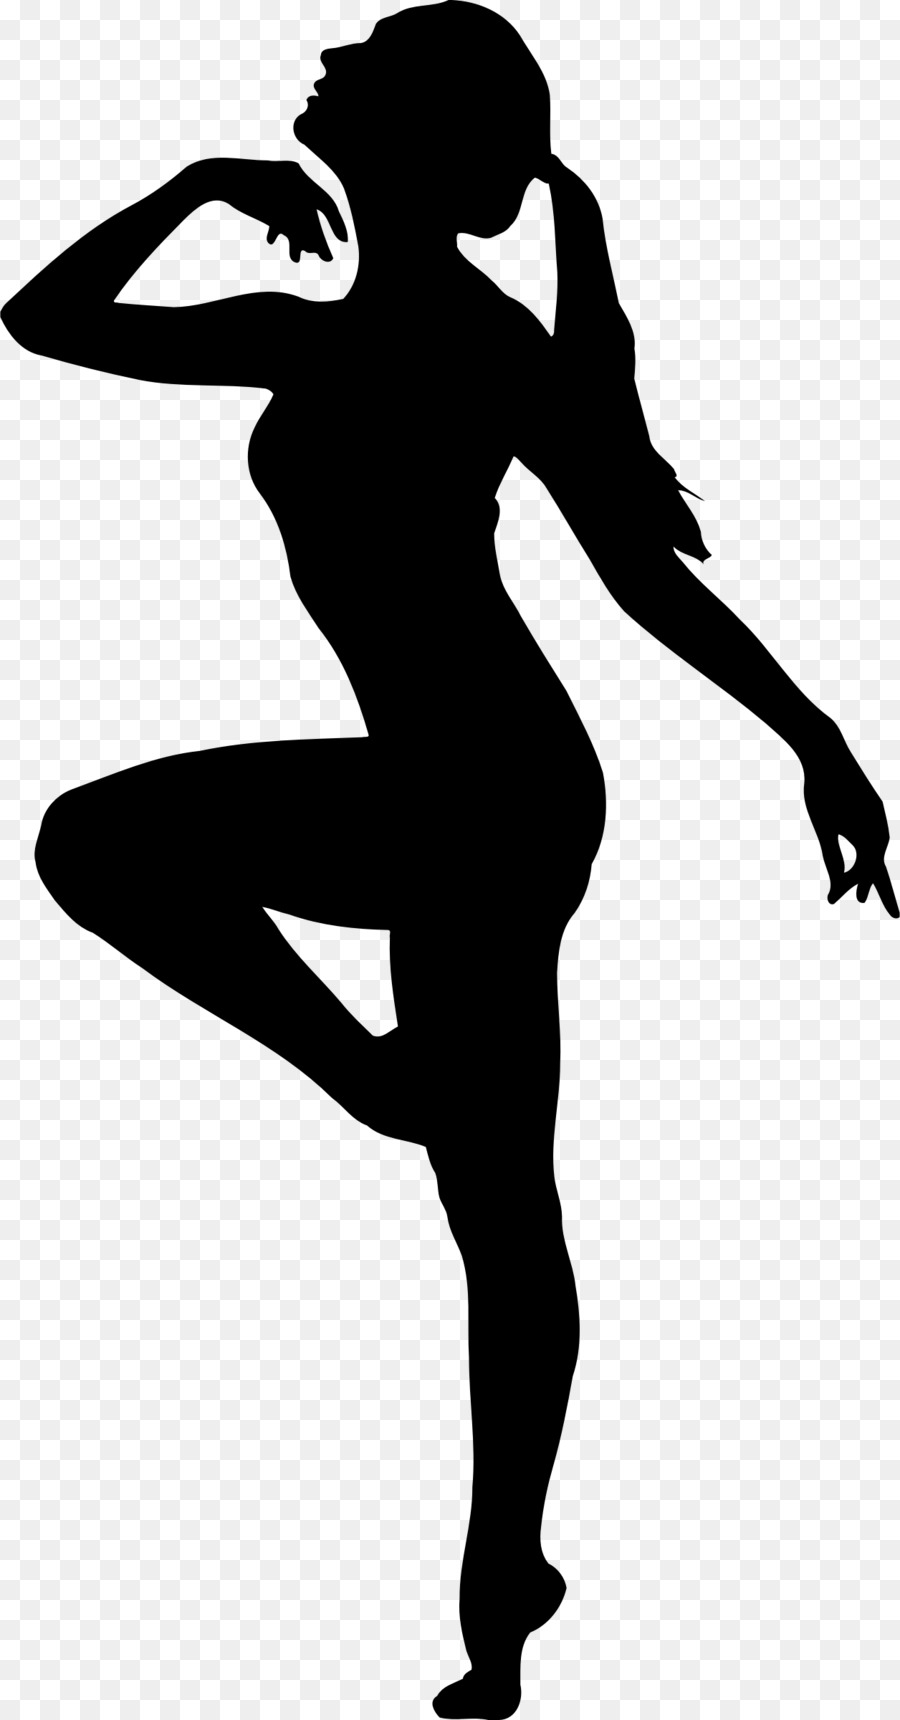 Download 35+ Dancers Silhouette Svg Free Gif Free SVG files | Silhouette and Cricut Cutting Files